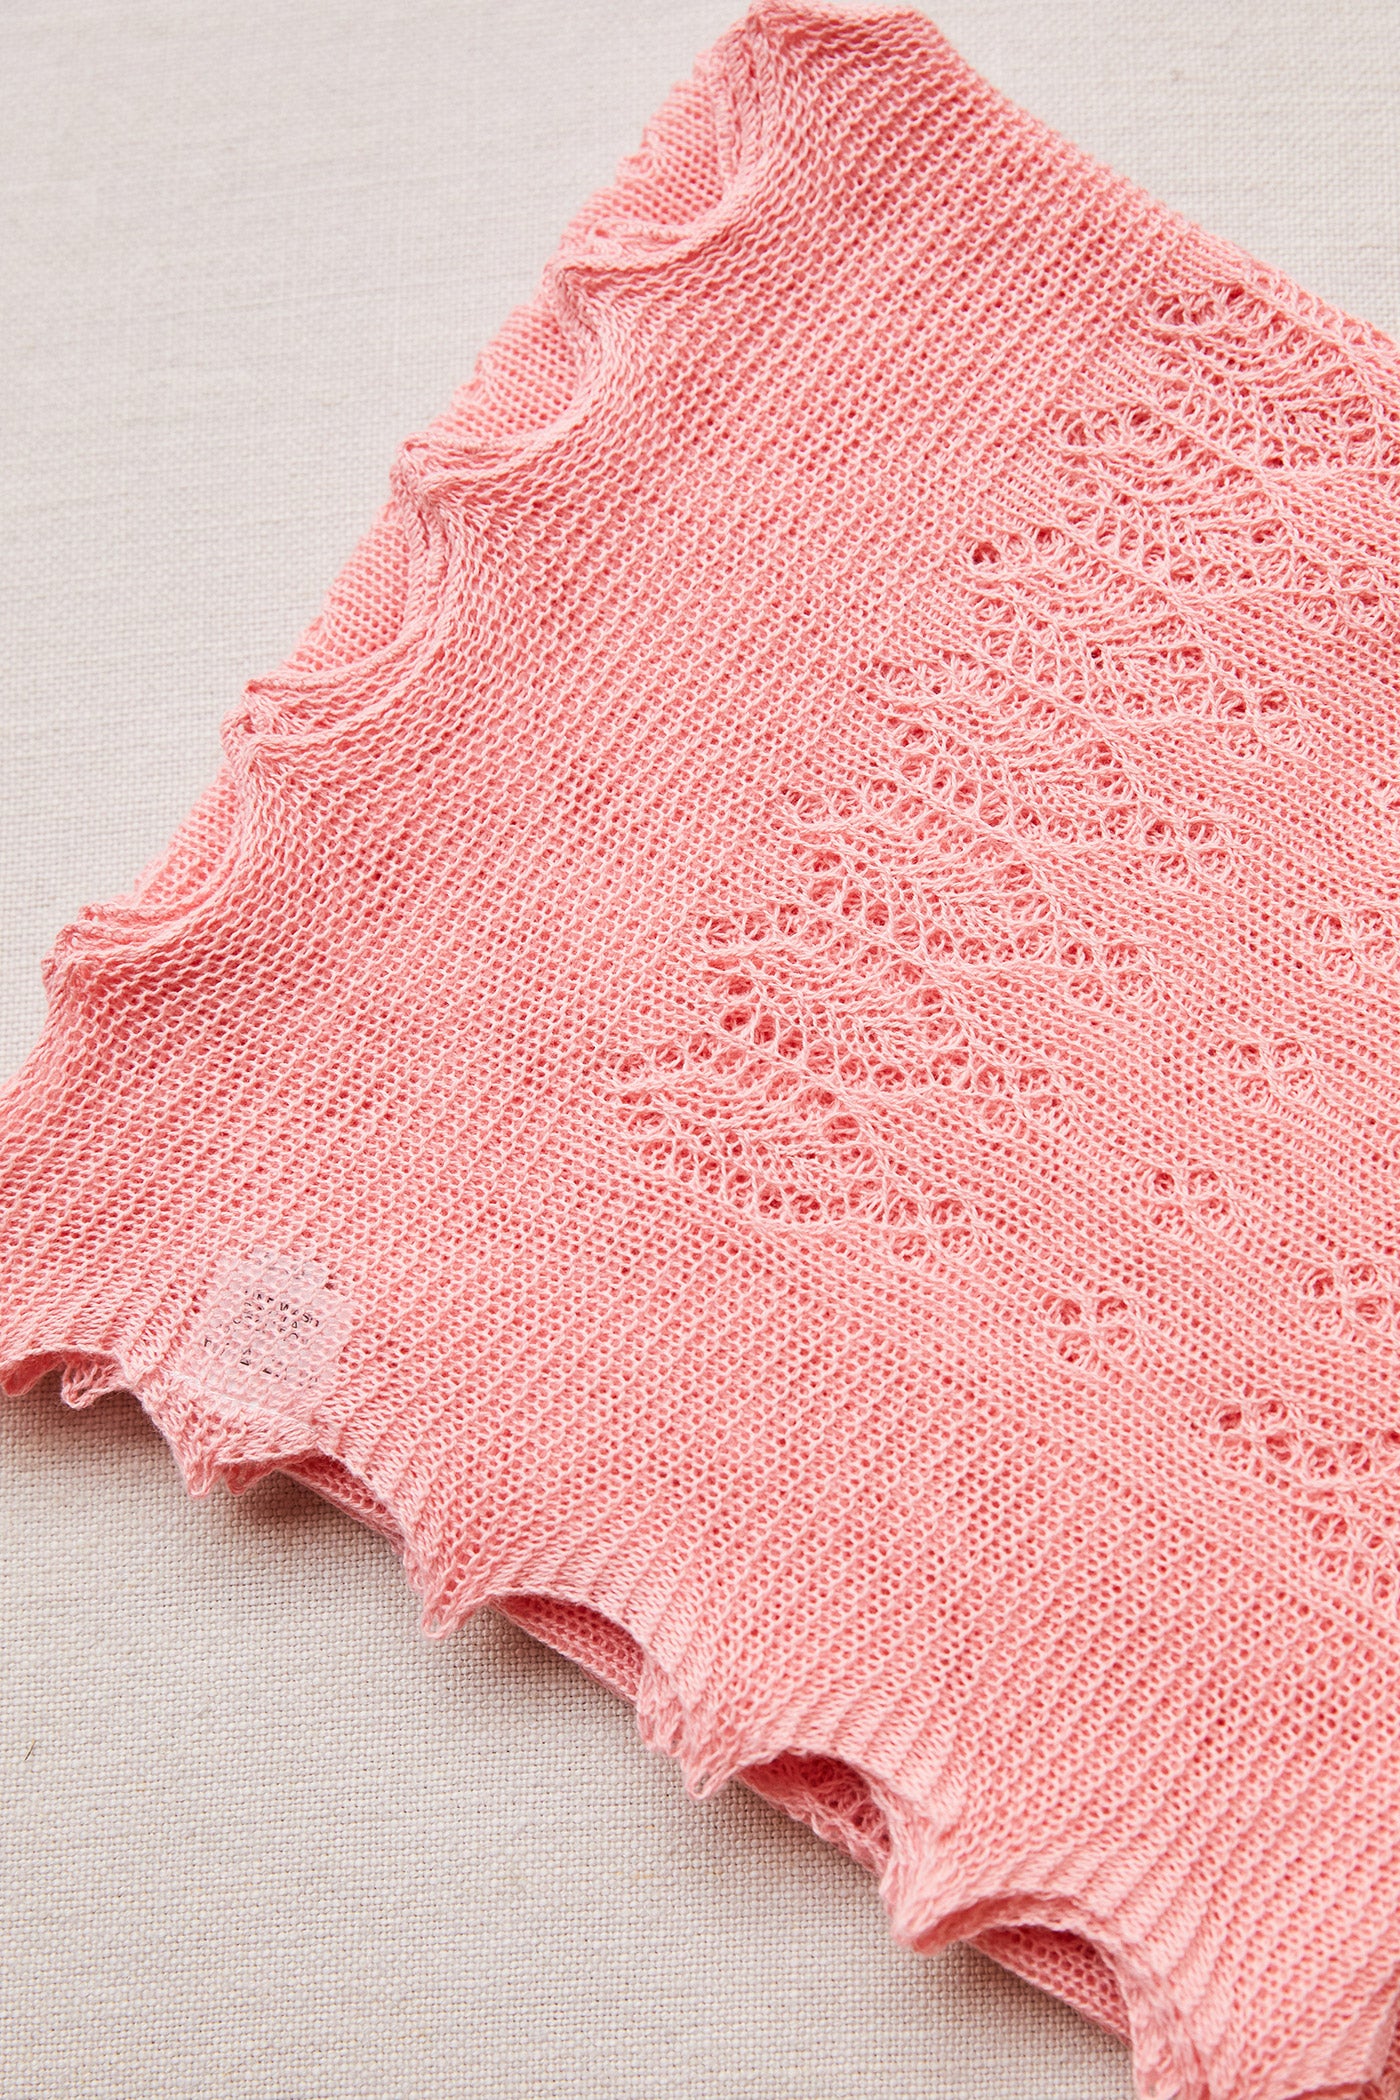 Cotton Shawl in Lace Knit